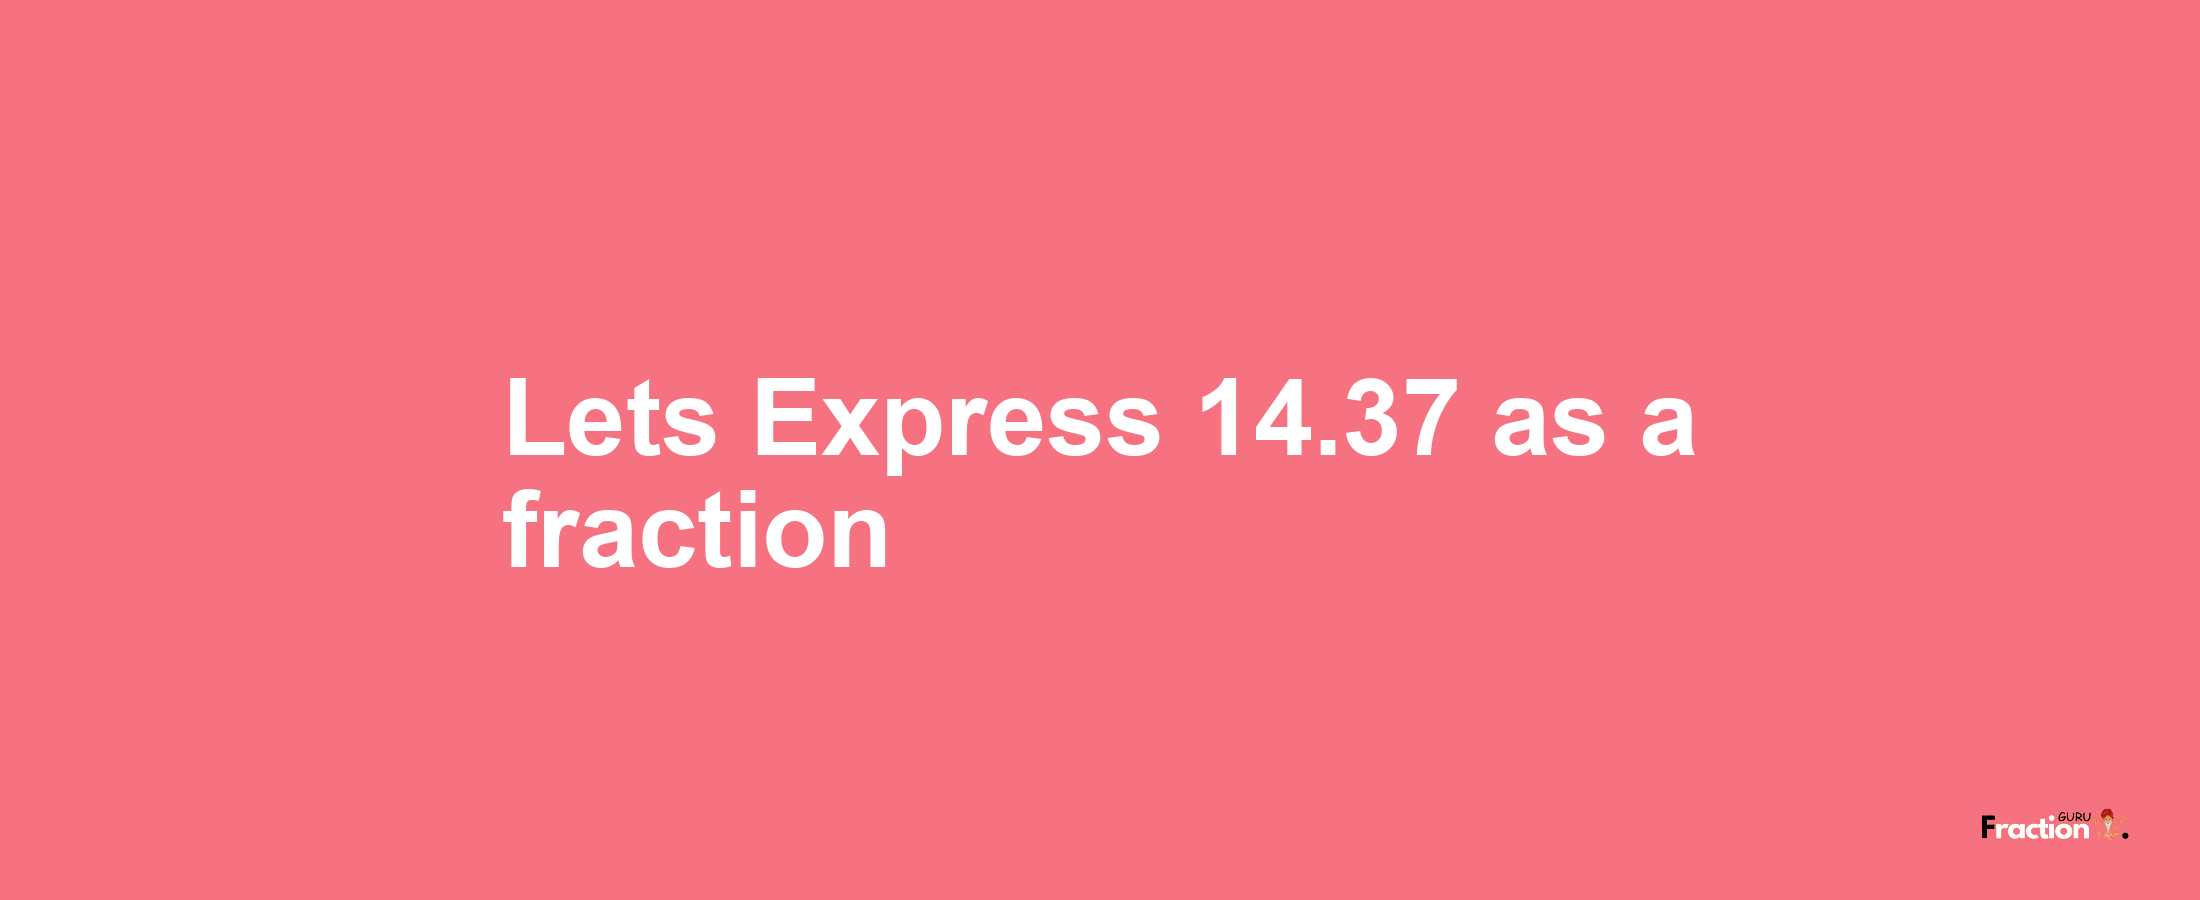 Lets Express 14.37 as afraction